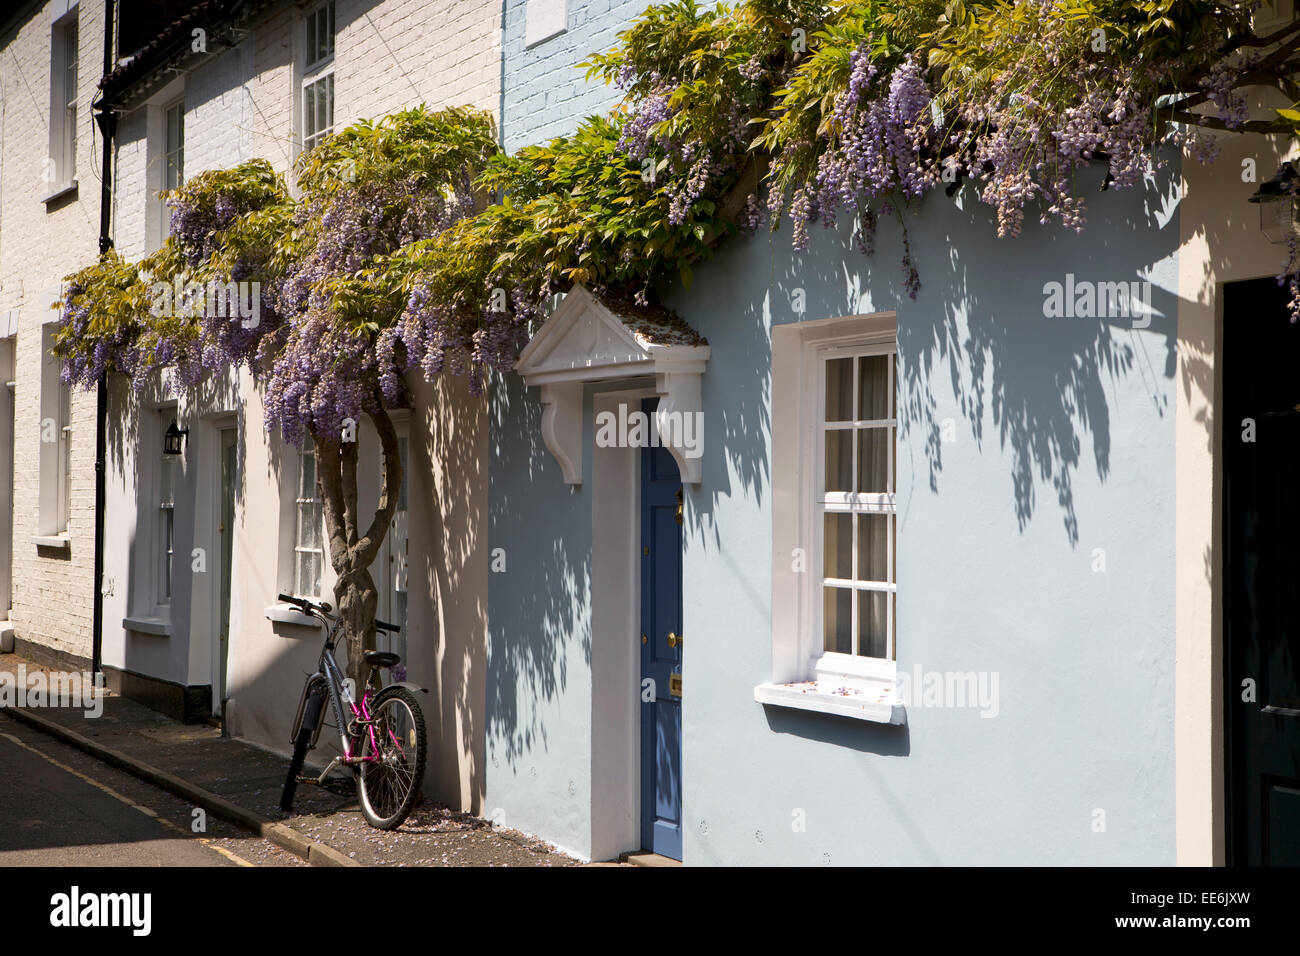 Twickenham, Ferry Road, wisteria hung terraced cottages Stock Photo